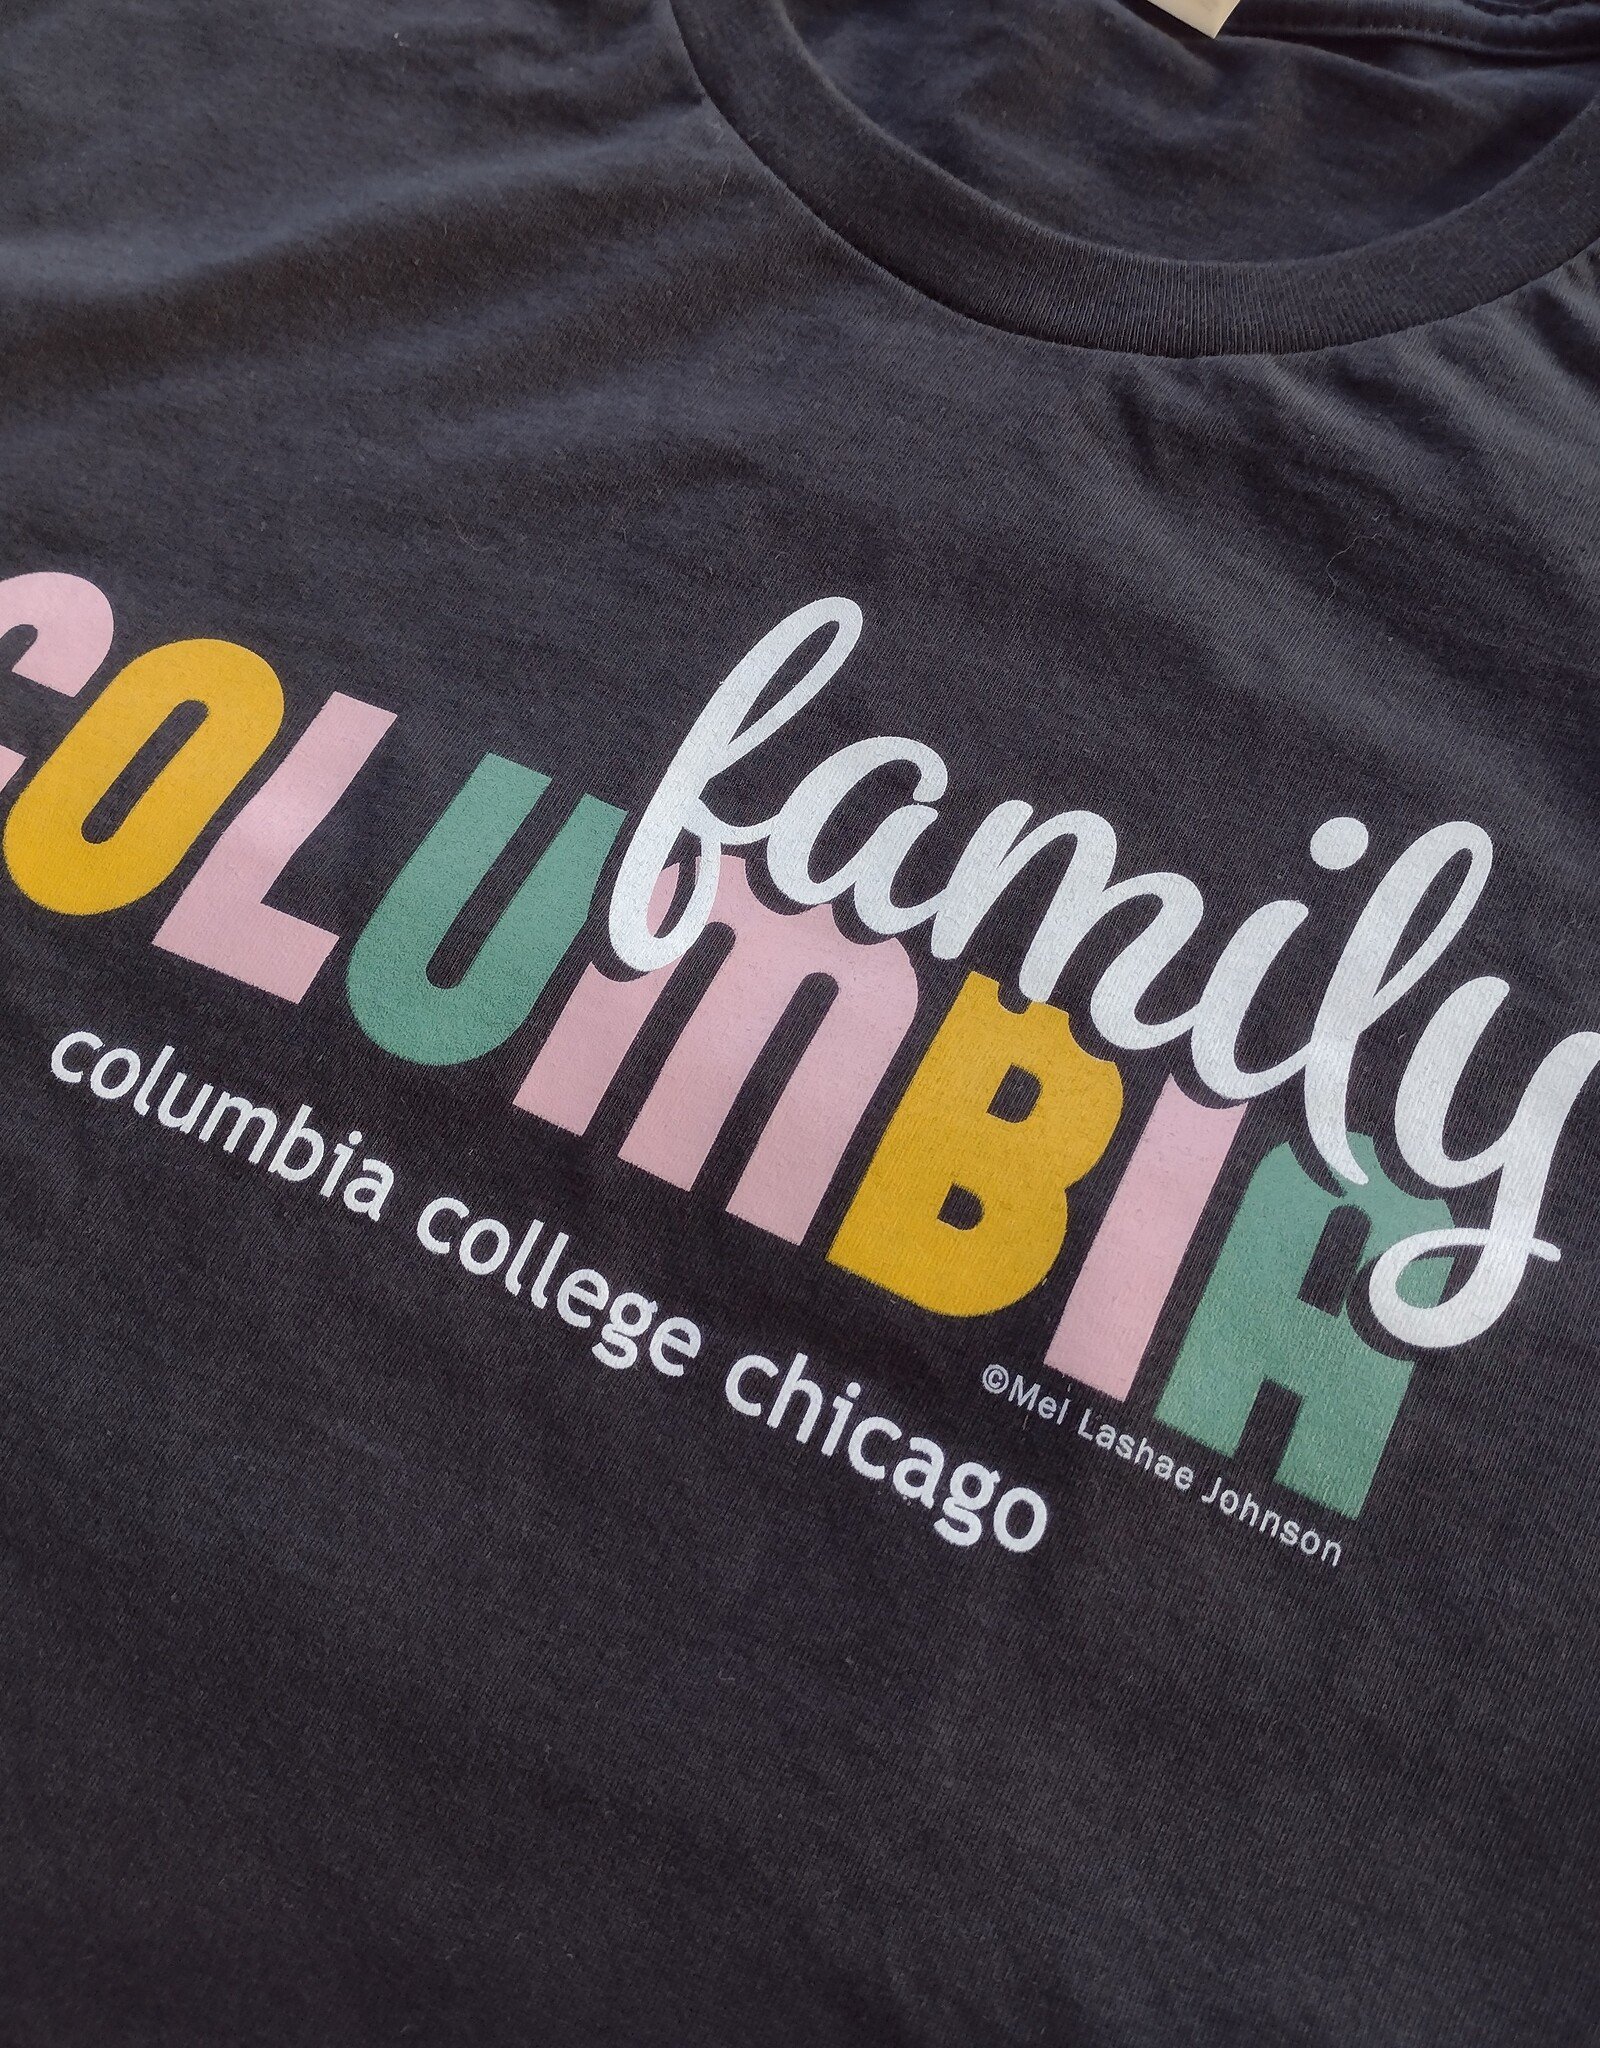 Buy Columbia, By Columbia Columbia Family T-Shirt